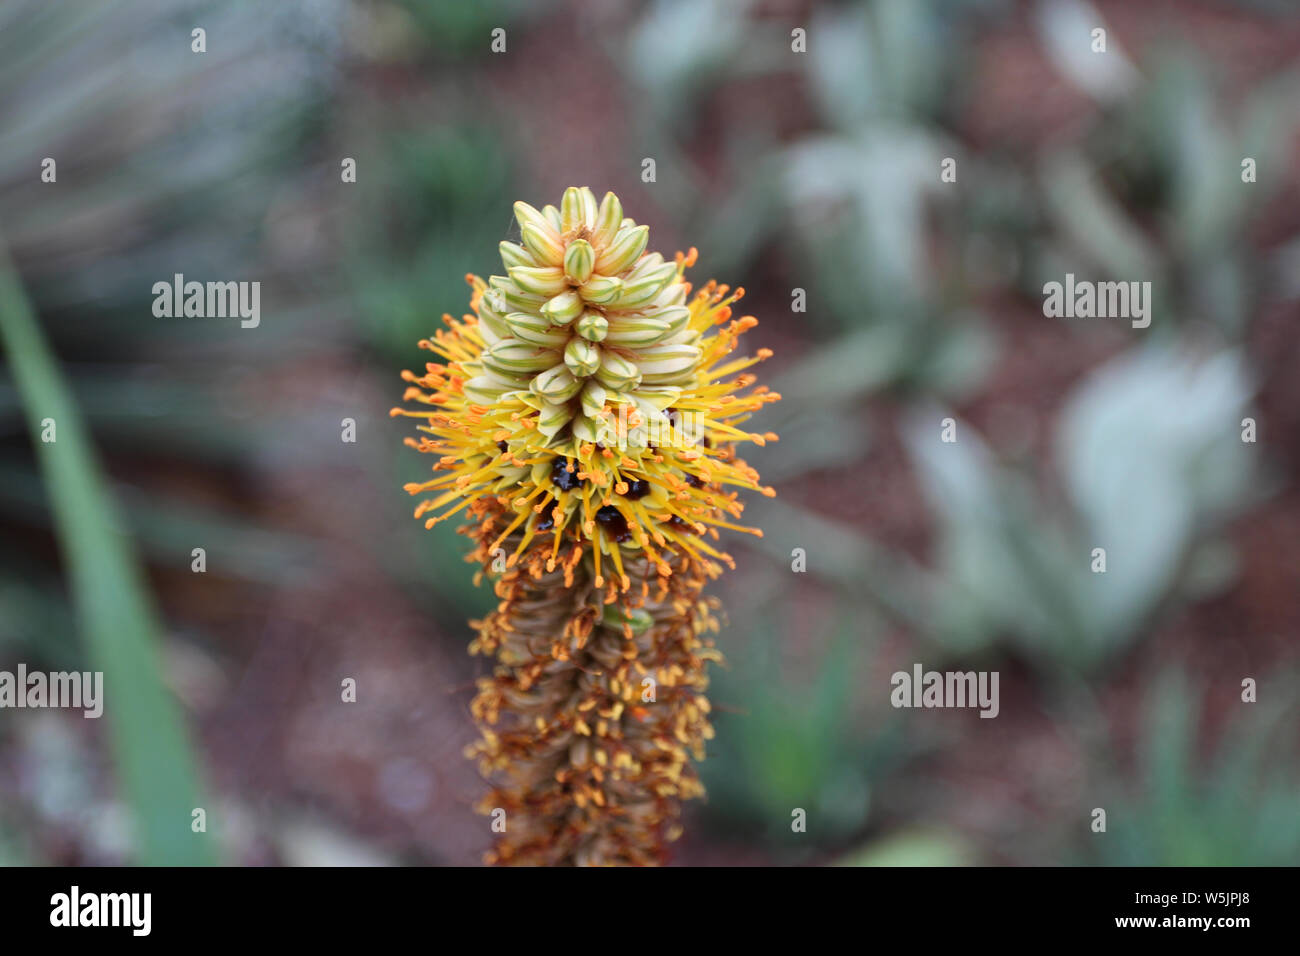 Close up of a flowering stalk of Cat's Tail Aloe with flowers, buds and spent blooms Stock Photo